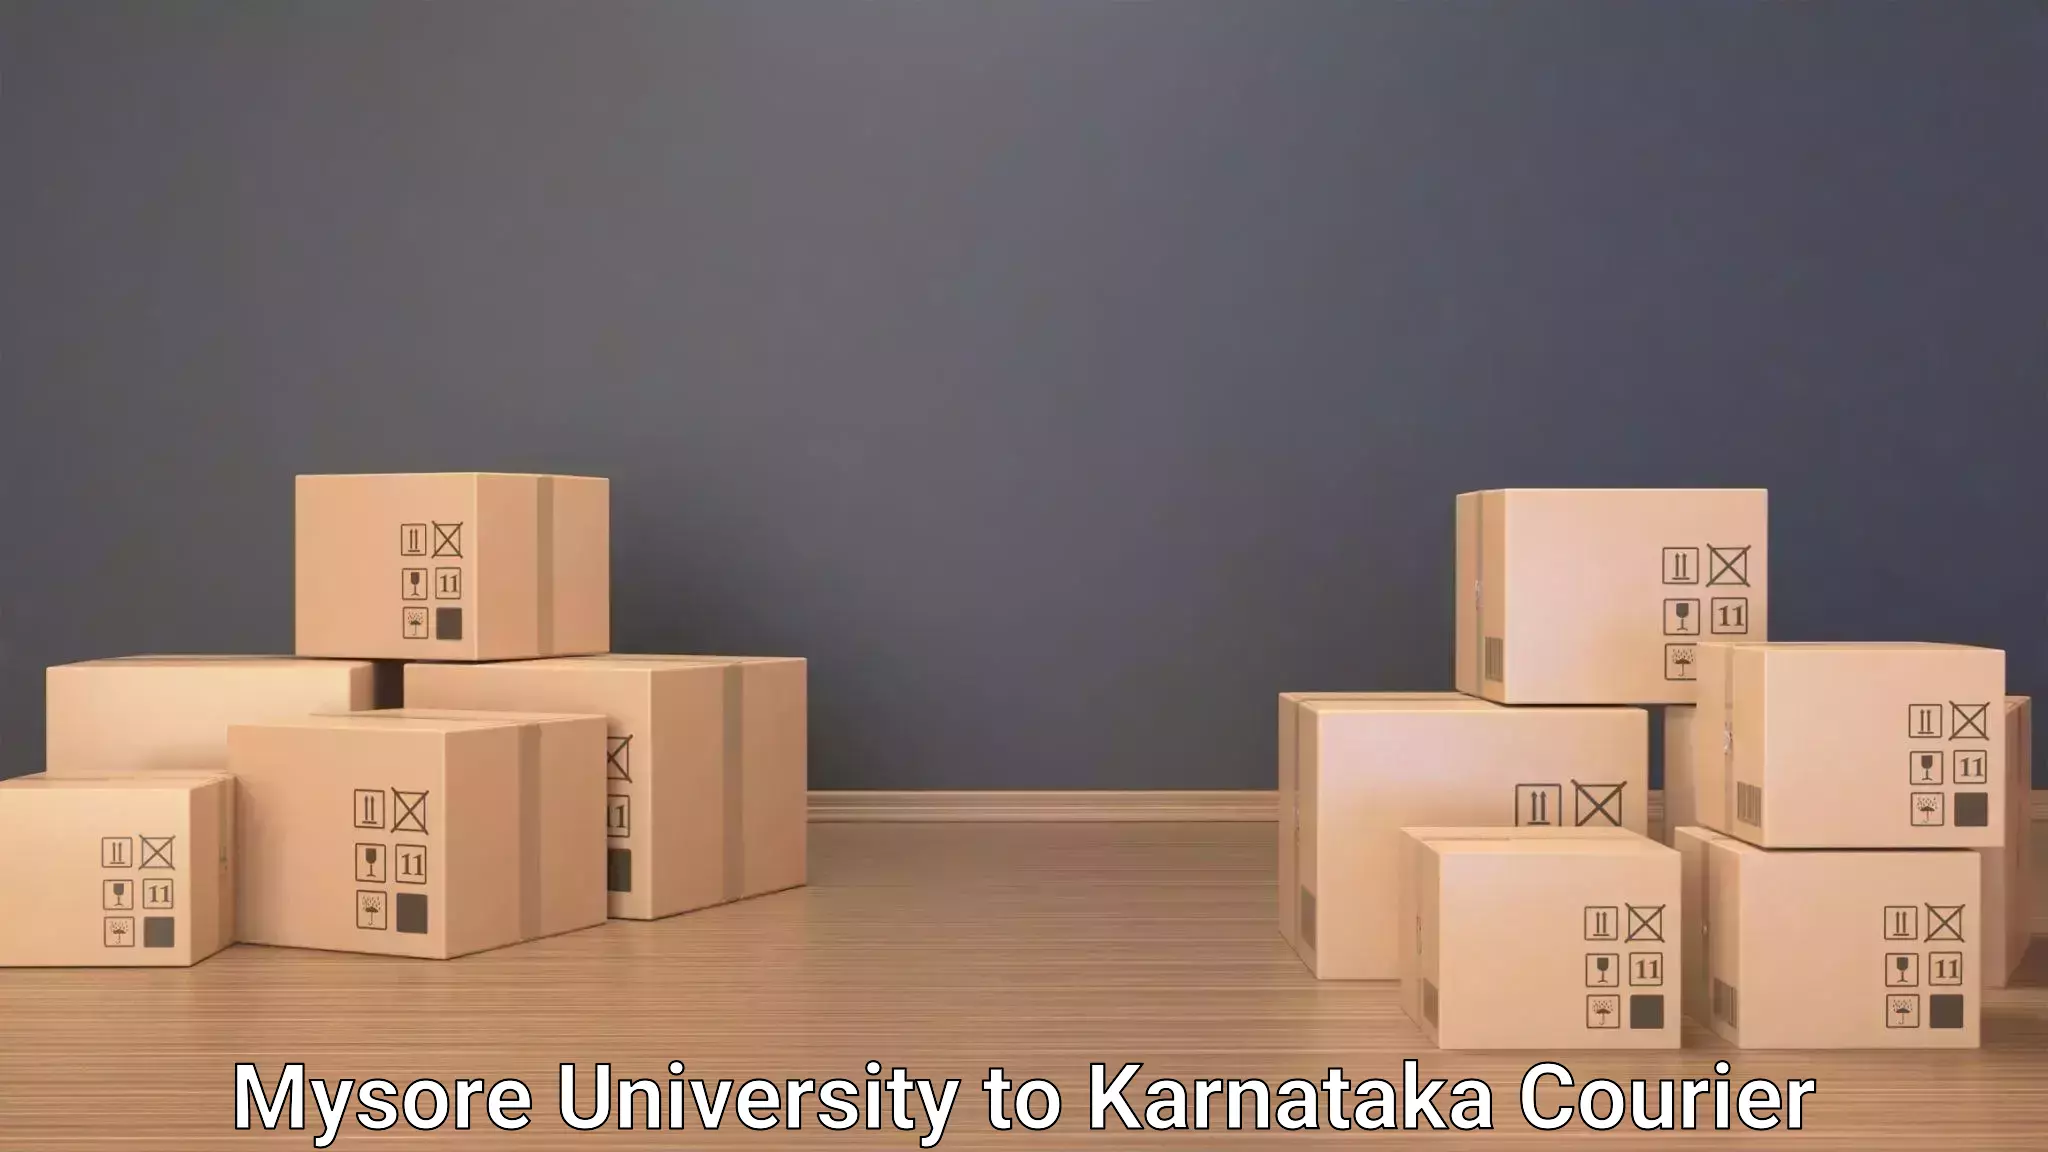 Luggage delivery solutions Mysore University to Bengaluru